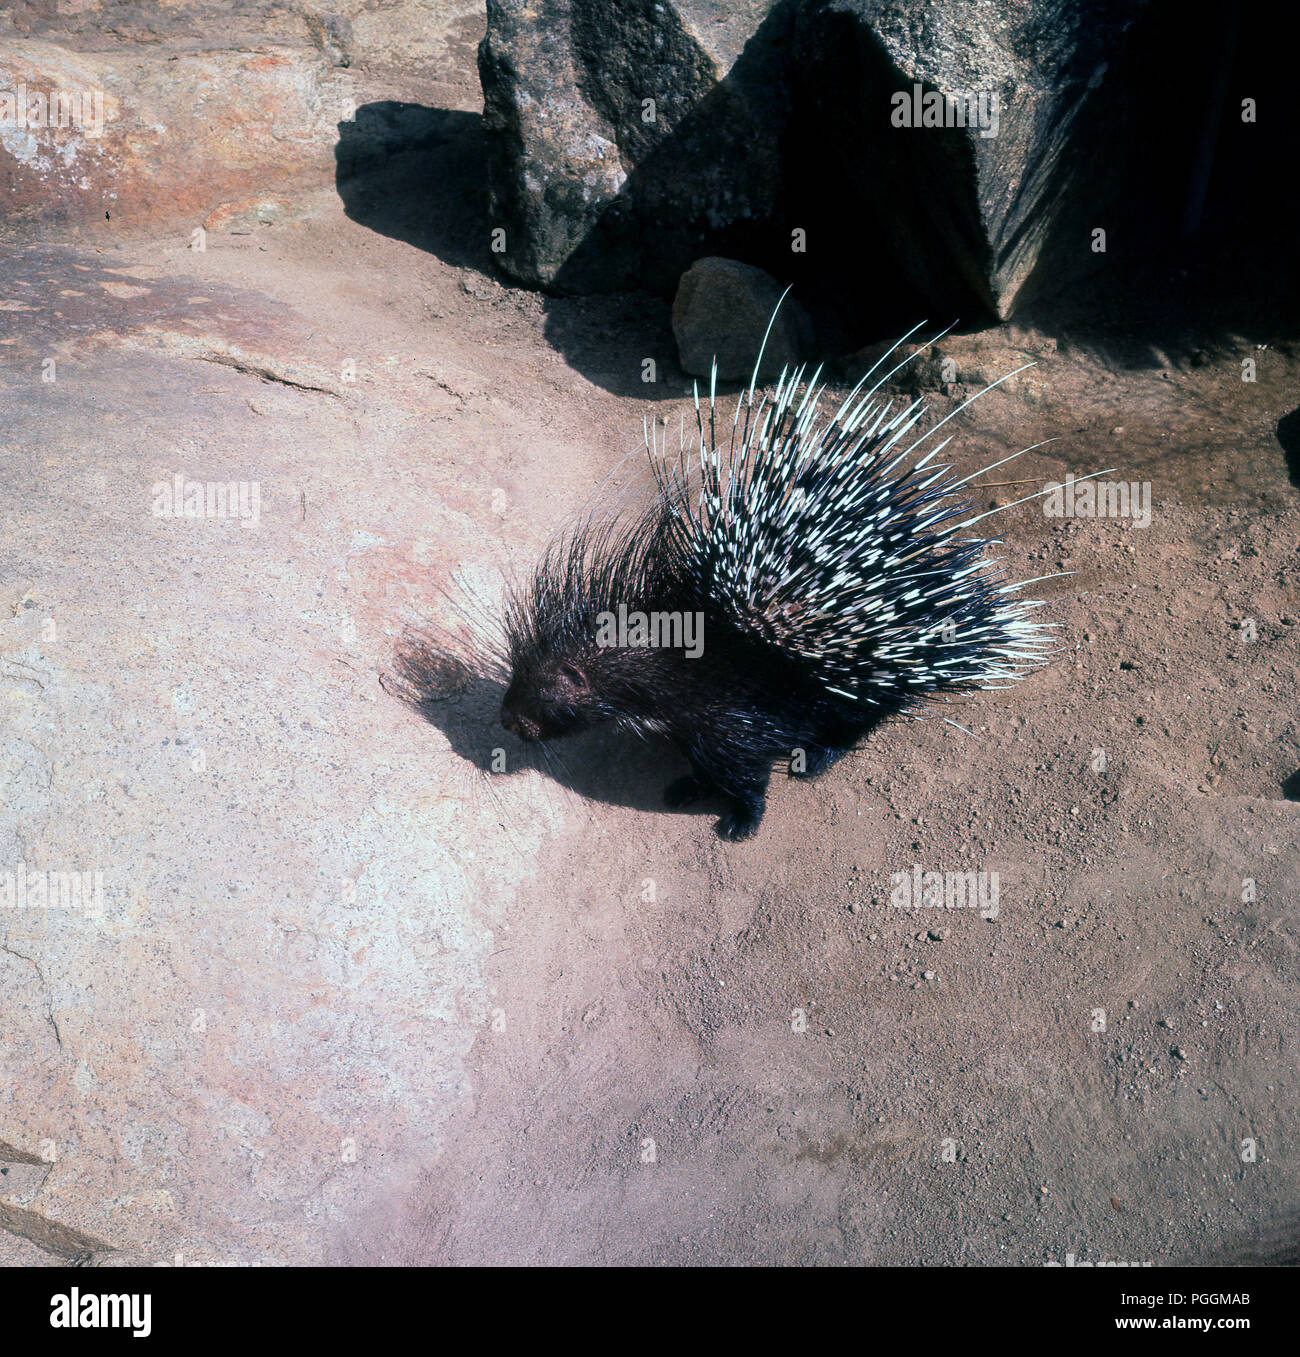 1960s, view from above of an old world porcupine on dusty ground, showing  its sharp spines or quills that protect it from predators Stock Photo -  Alamy